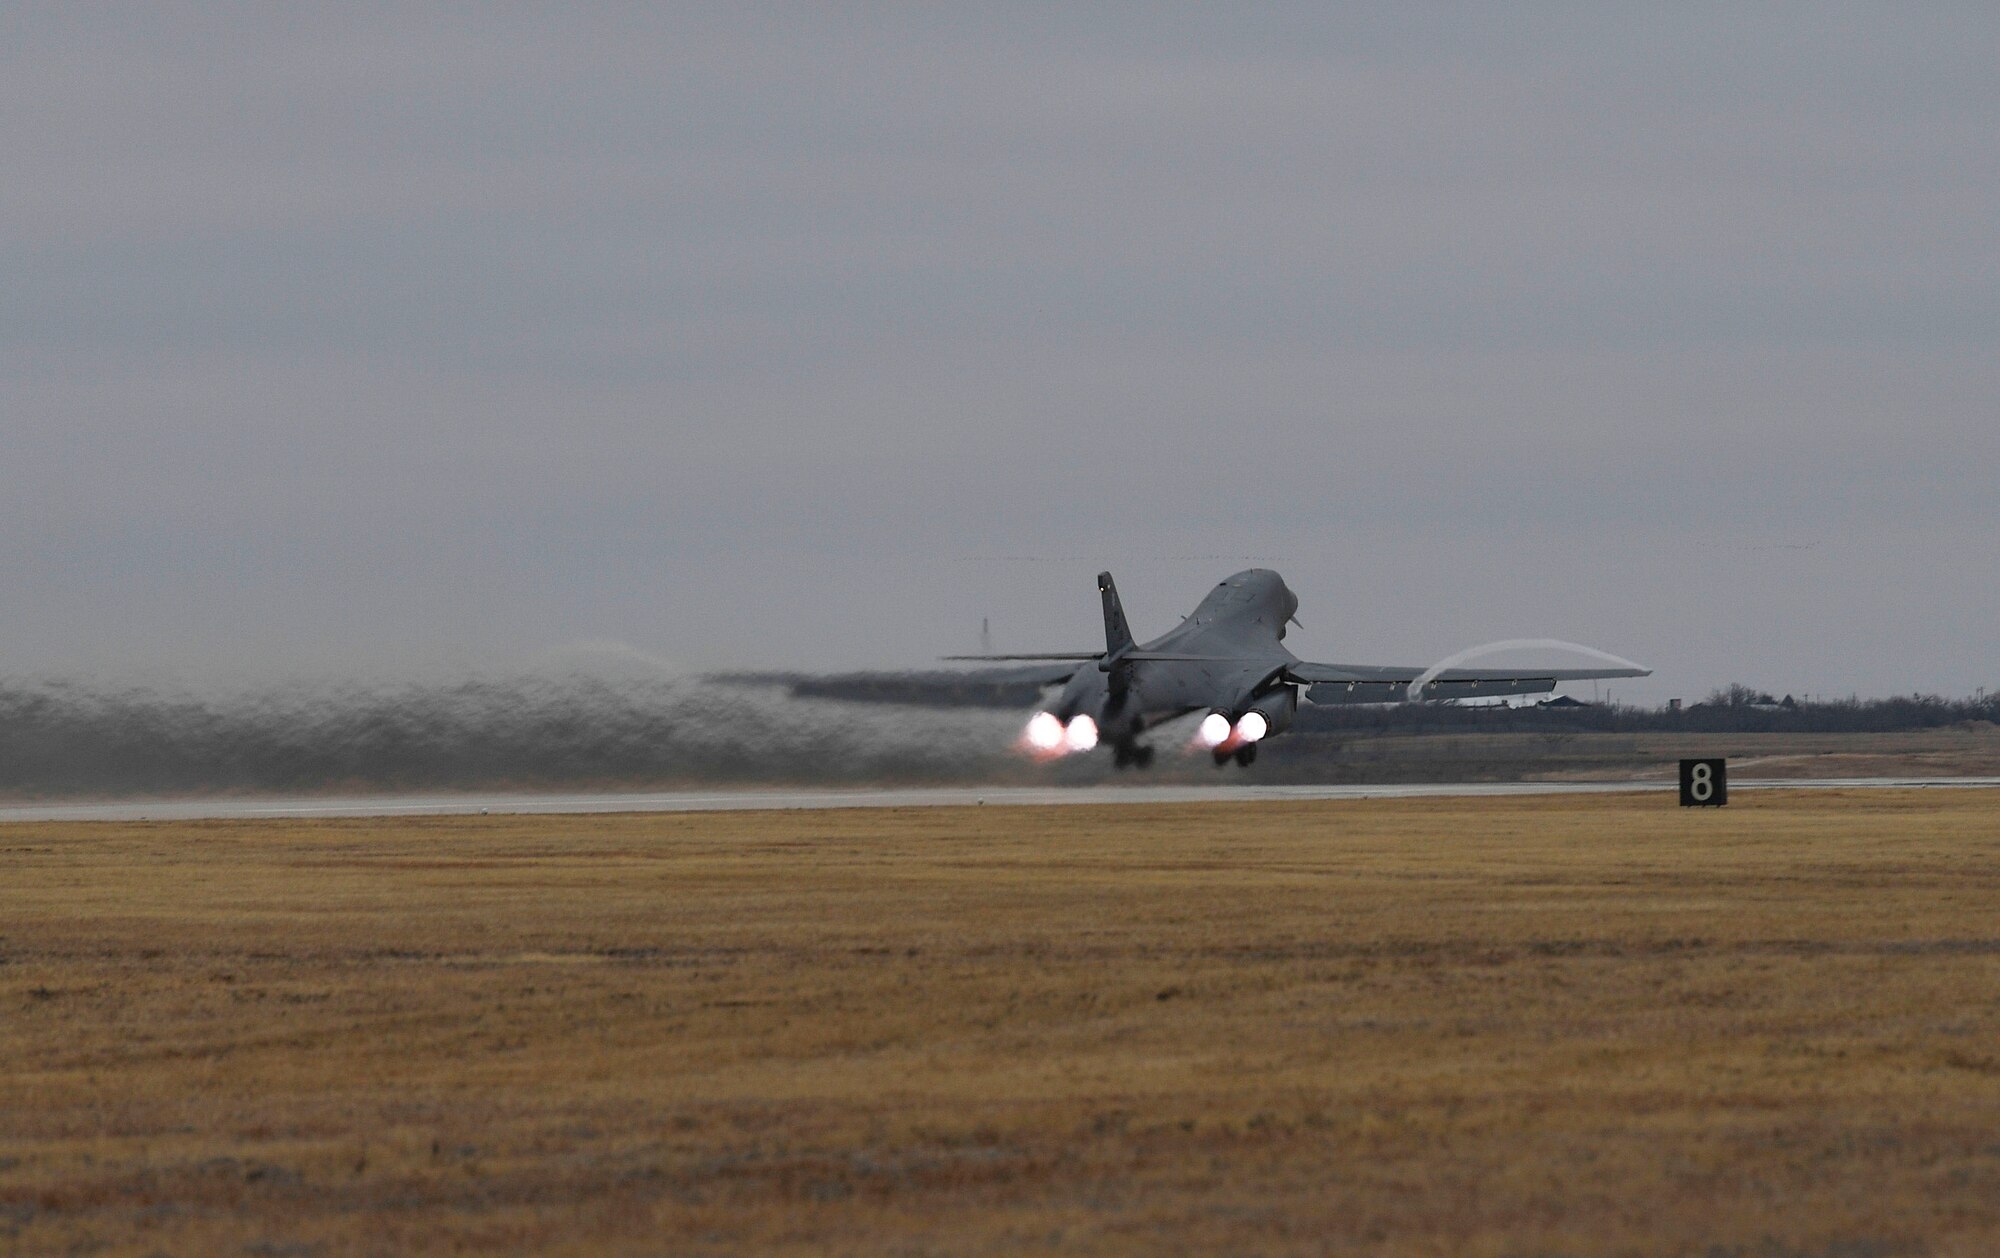 Photo of a B-1 Lancer bomber taking off